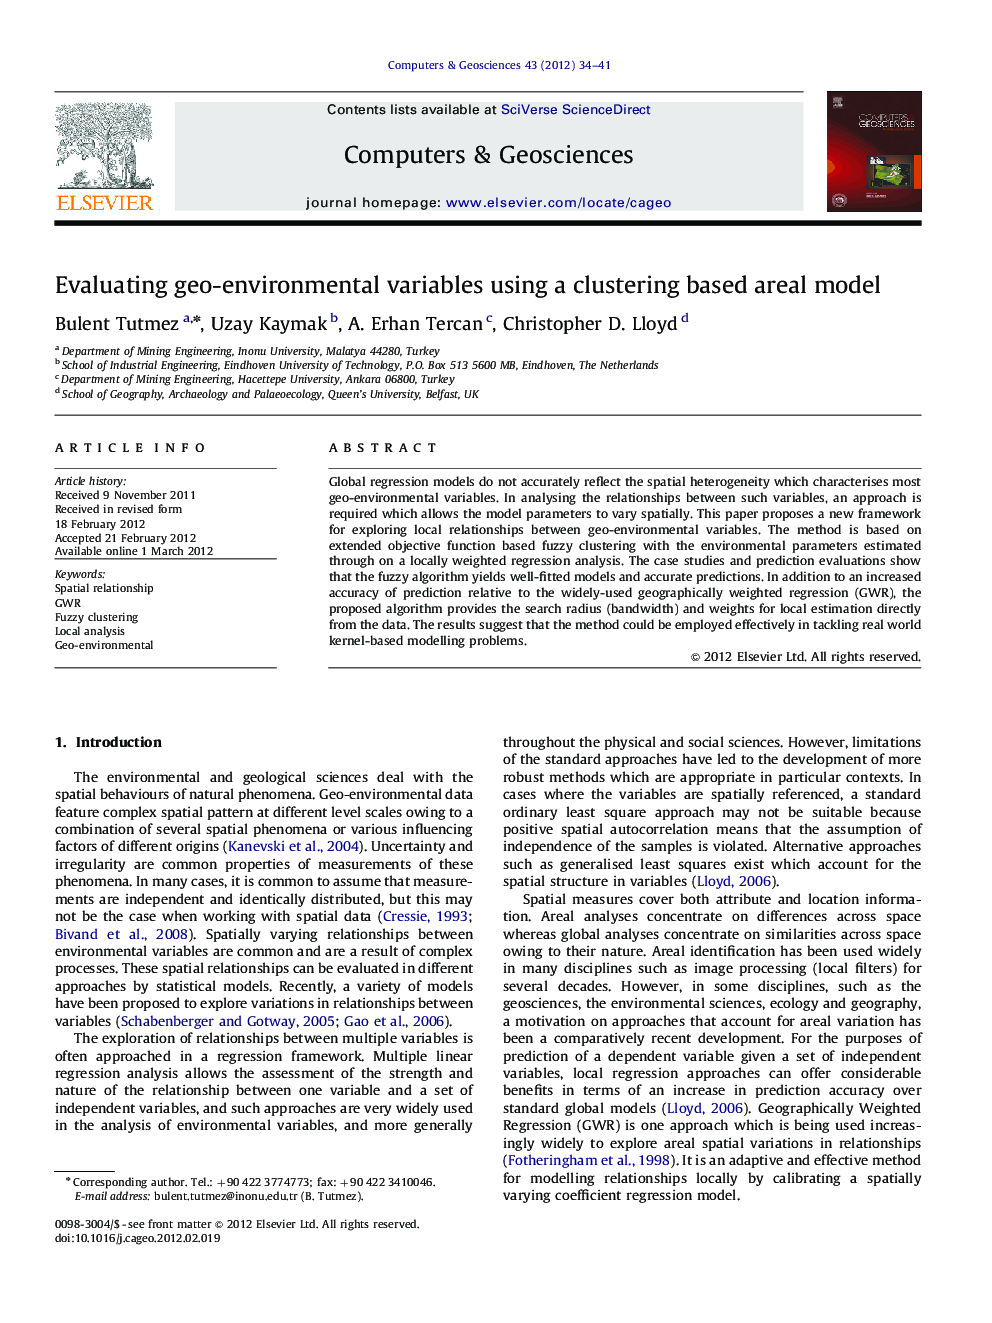 Evaluating geo-environmental variables using a clustering based areal model